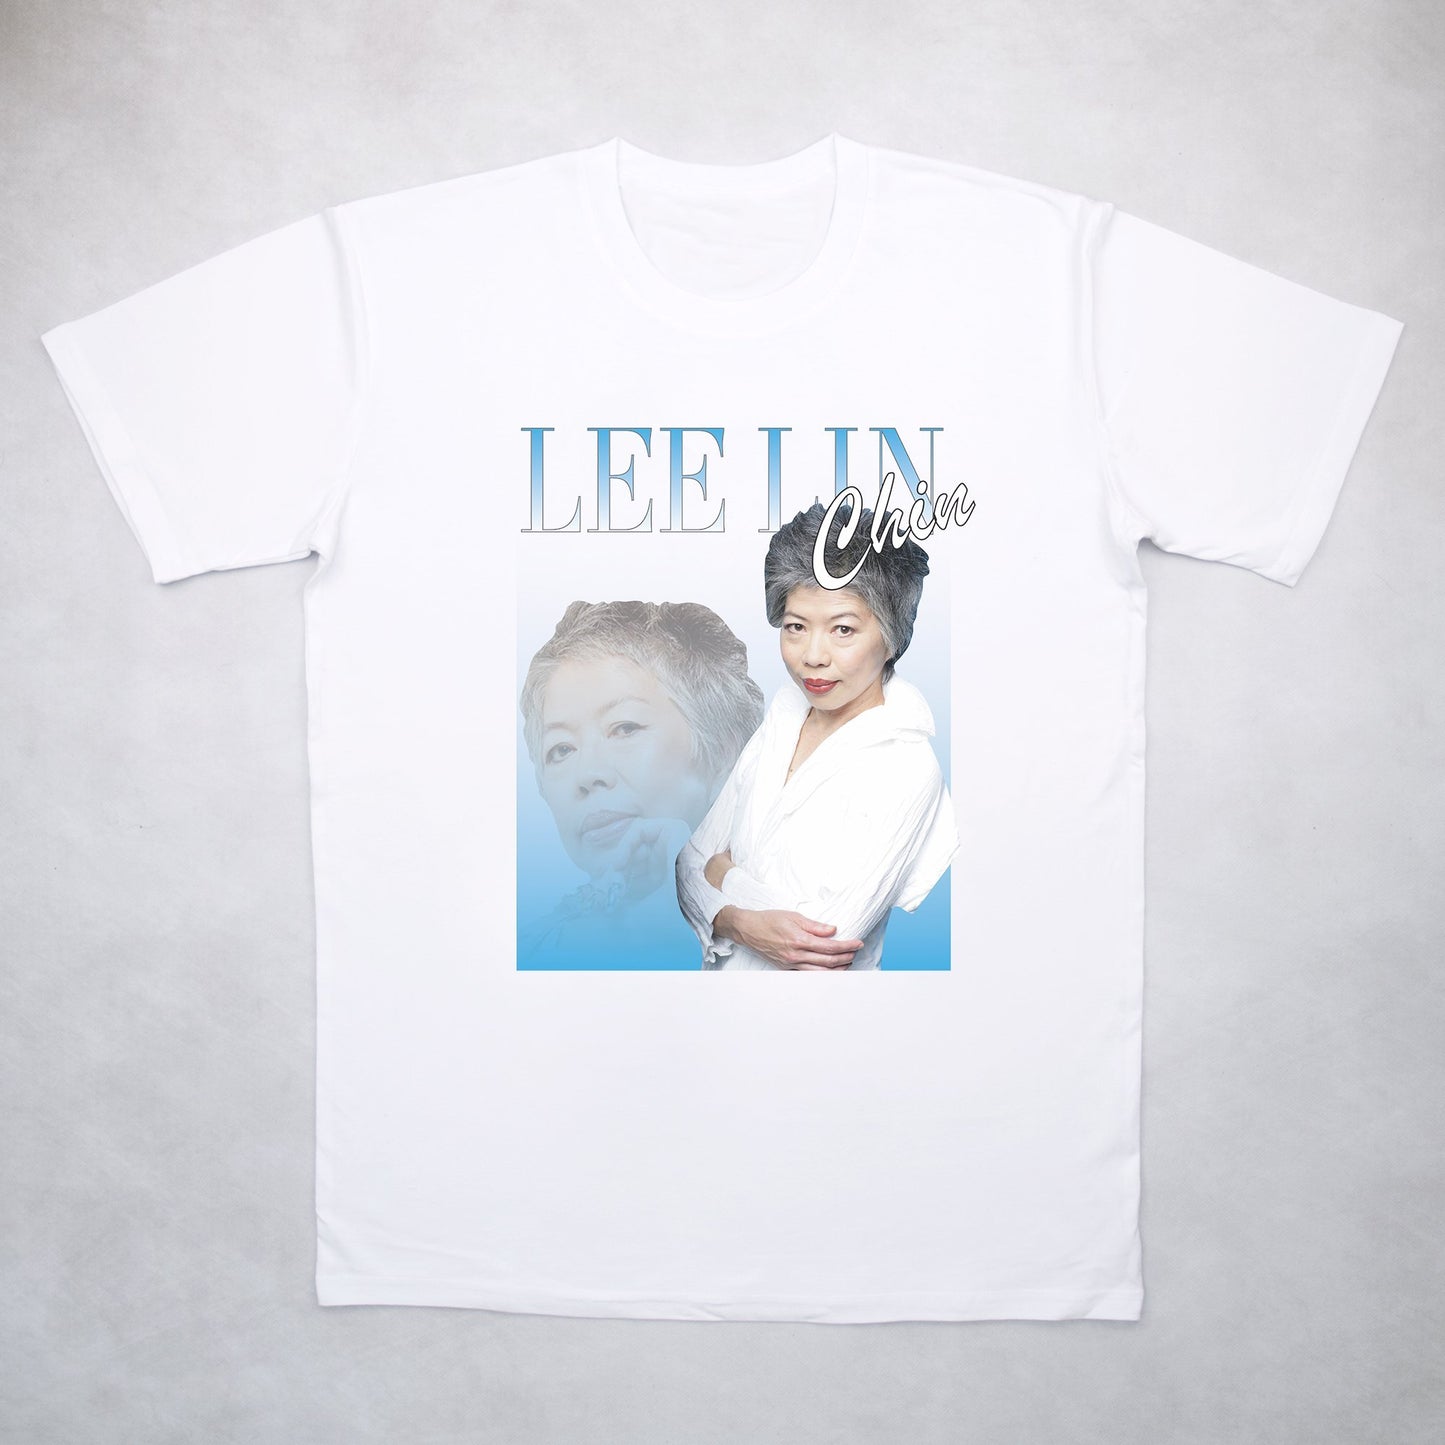 Classy Duds Short Sleeve T-Shirts S / White / Standard Lee Lin Chin Commemorative Classic Tee